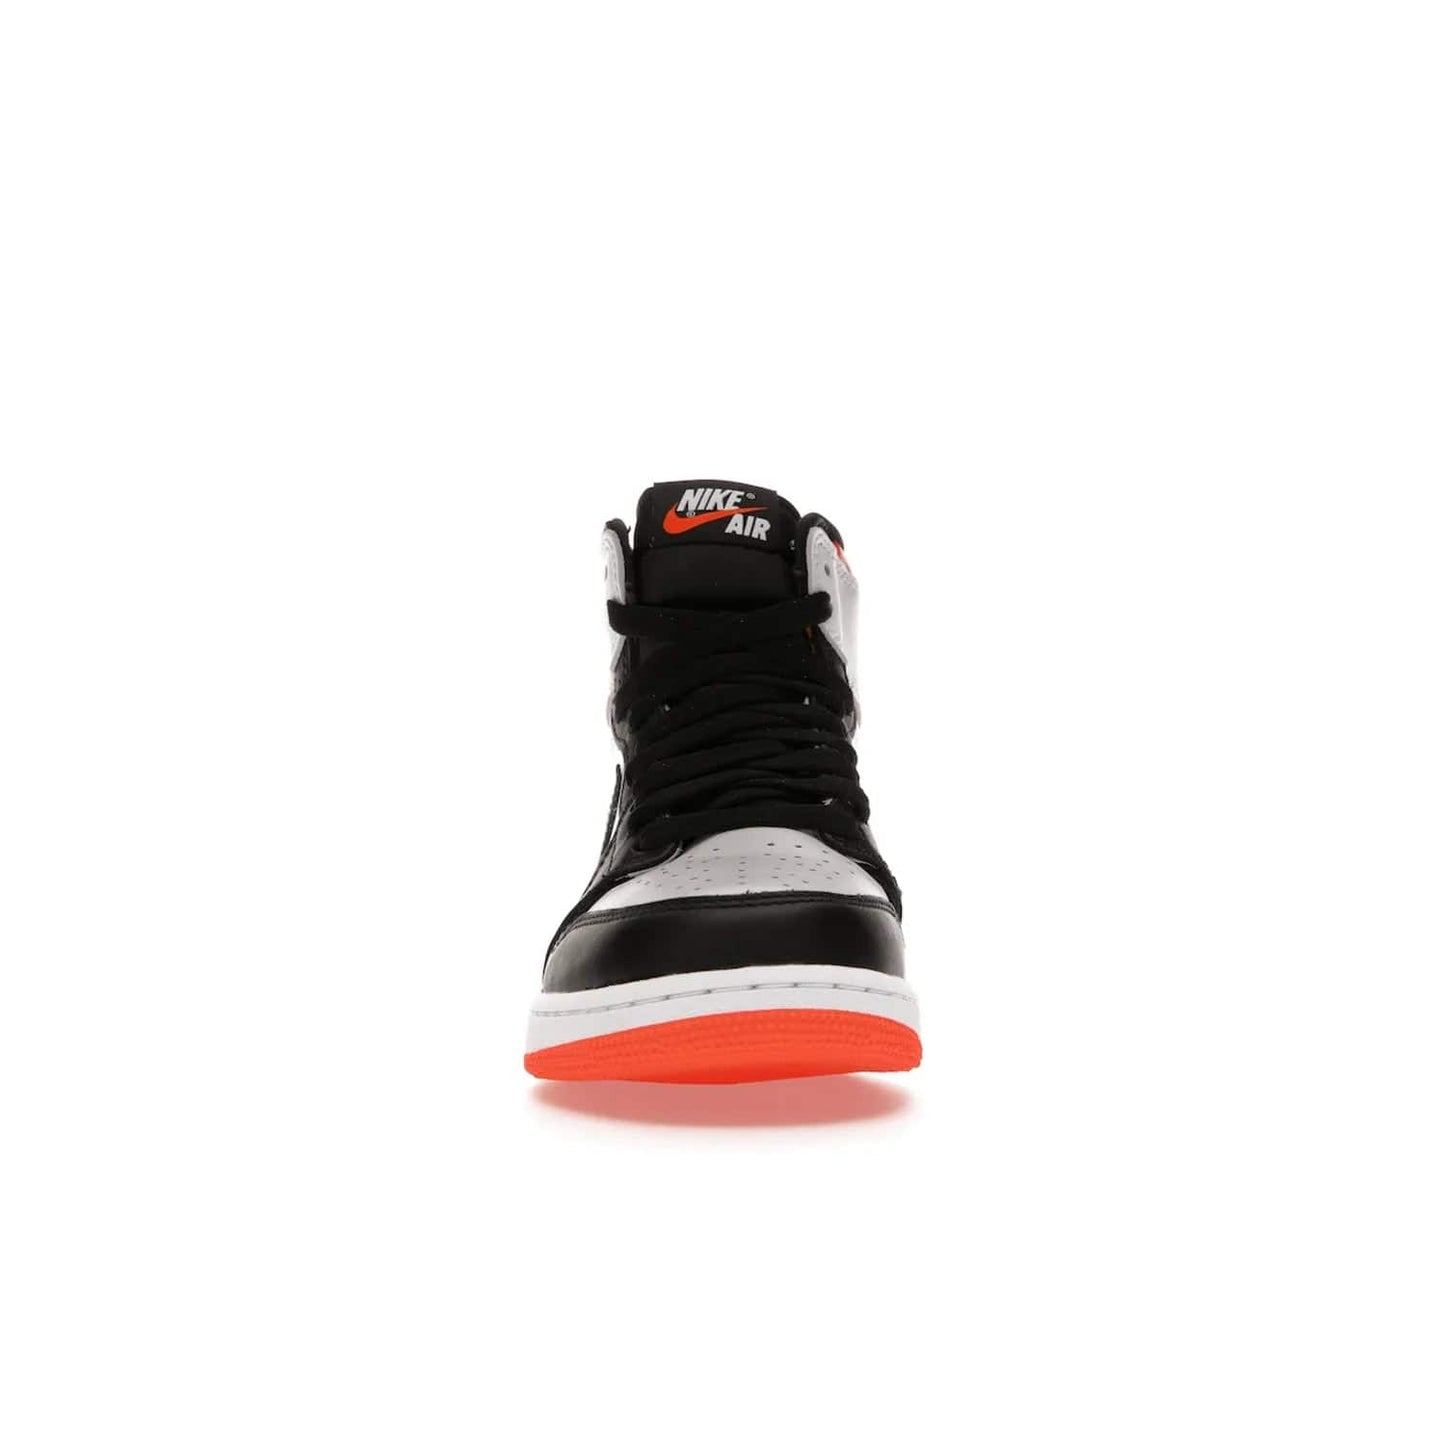 Jordan 1 High OG Electro Orange (GS) - Image 10 - Only at www.BallersClubKickz.com - The Air Jordan 1 High OG Electro Orange GS is the ideal shoe for kids on the go. Featuring white leather uppers, black overlays, and bright orange accents, it's sure to become a favorite. A great mix of classic style and vibrant colors, the shoe delivers air cushioning for comfort and hard orange rubber for grip. Release on July 17th, 2021. Get them a pair today.